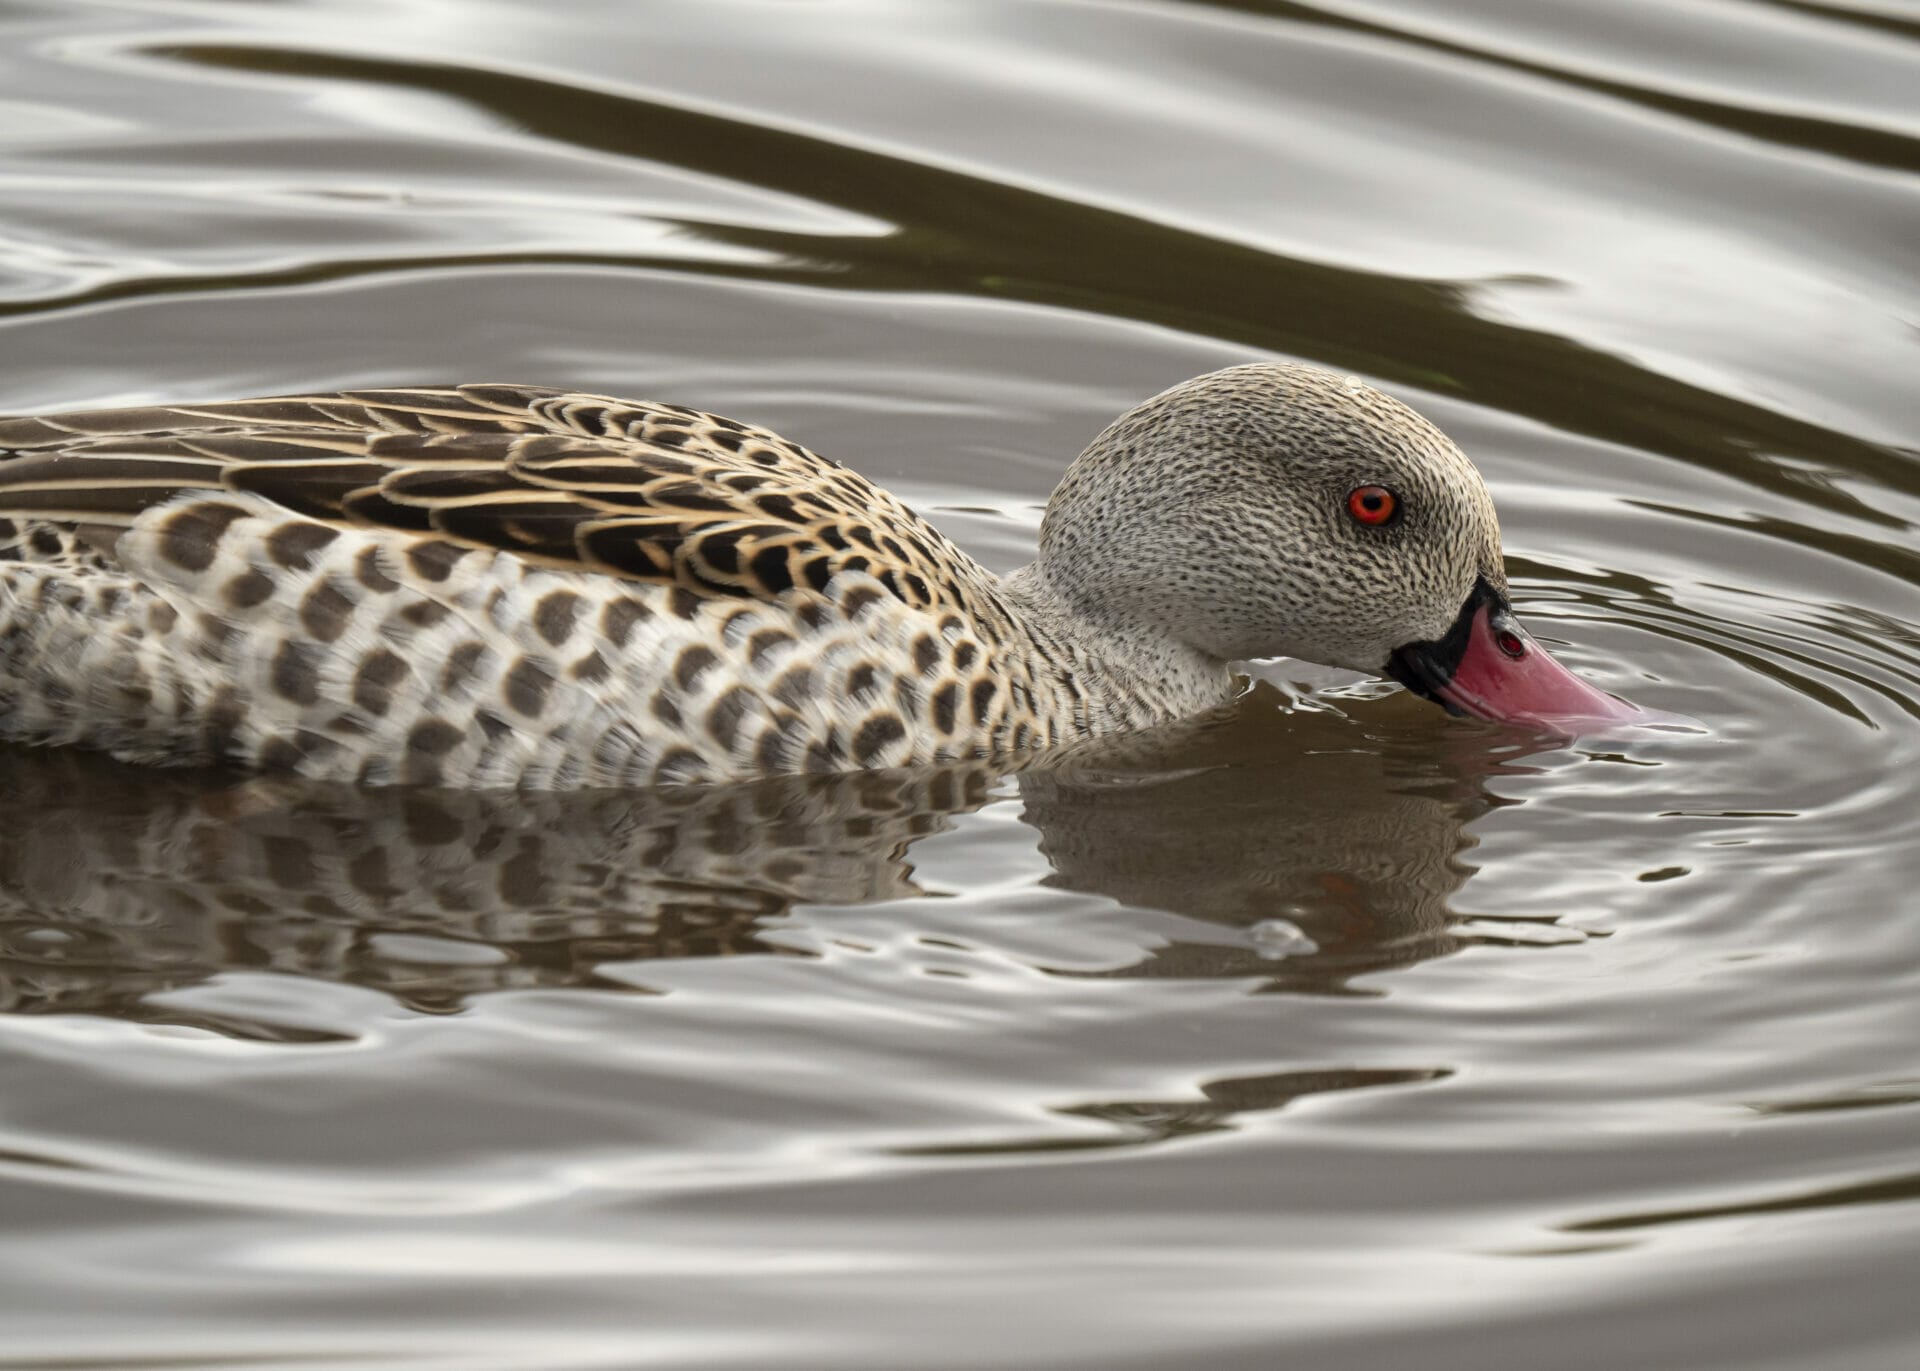 Wildlife Photography at Martin Mere WWT - Photo of a Wildfowl / Duck taken at a Welshot Photographic Academy Mini Module